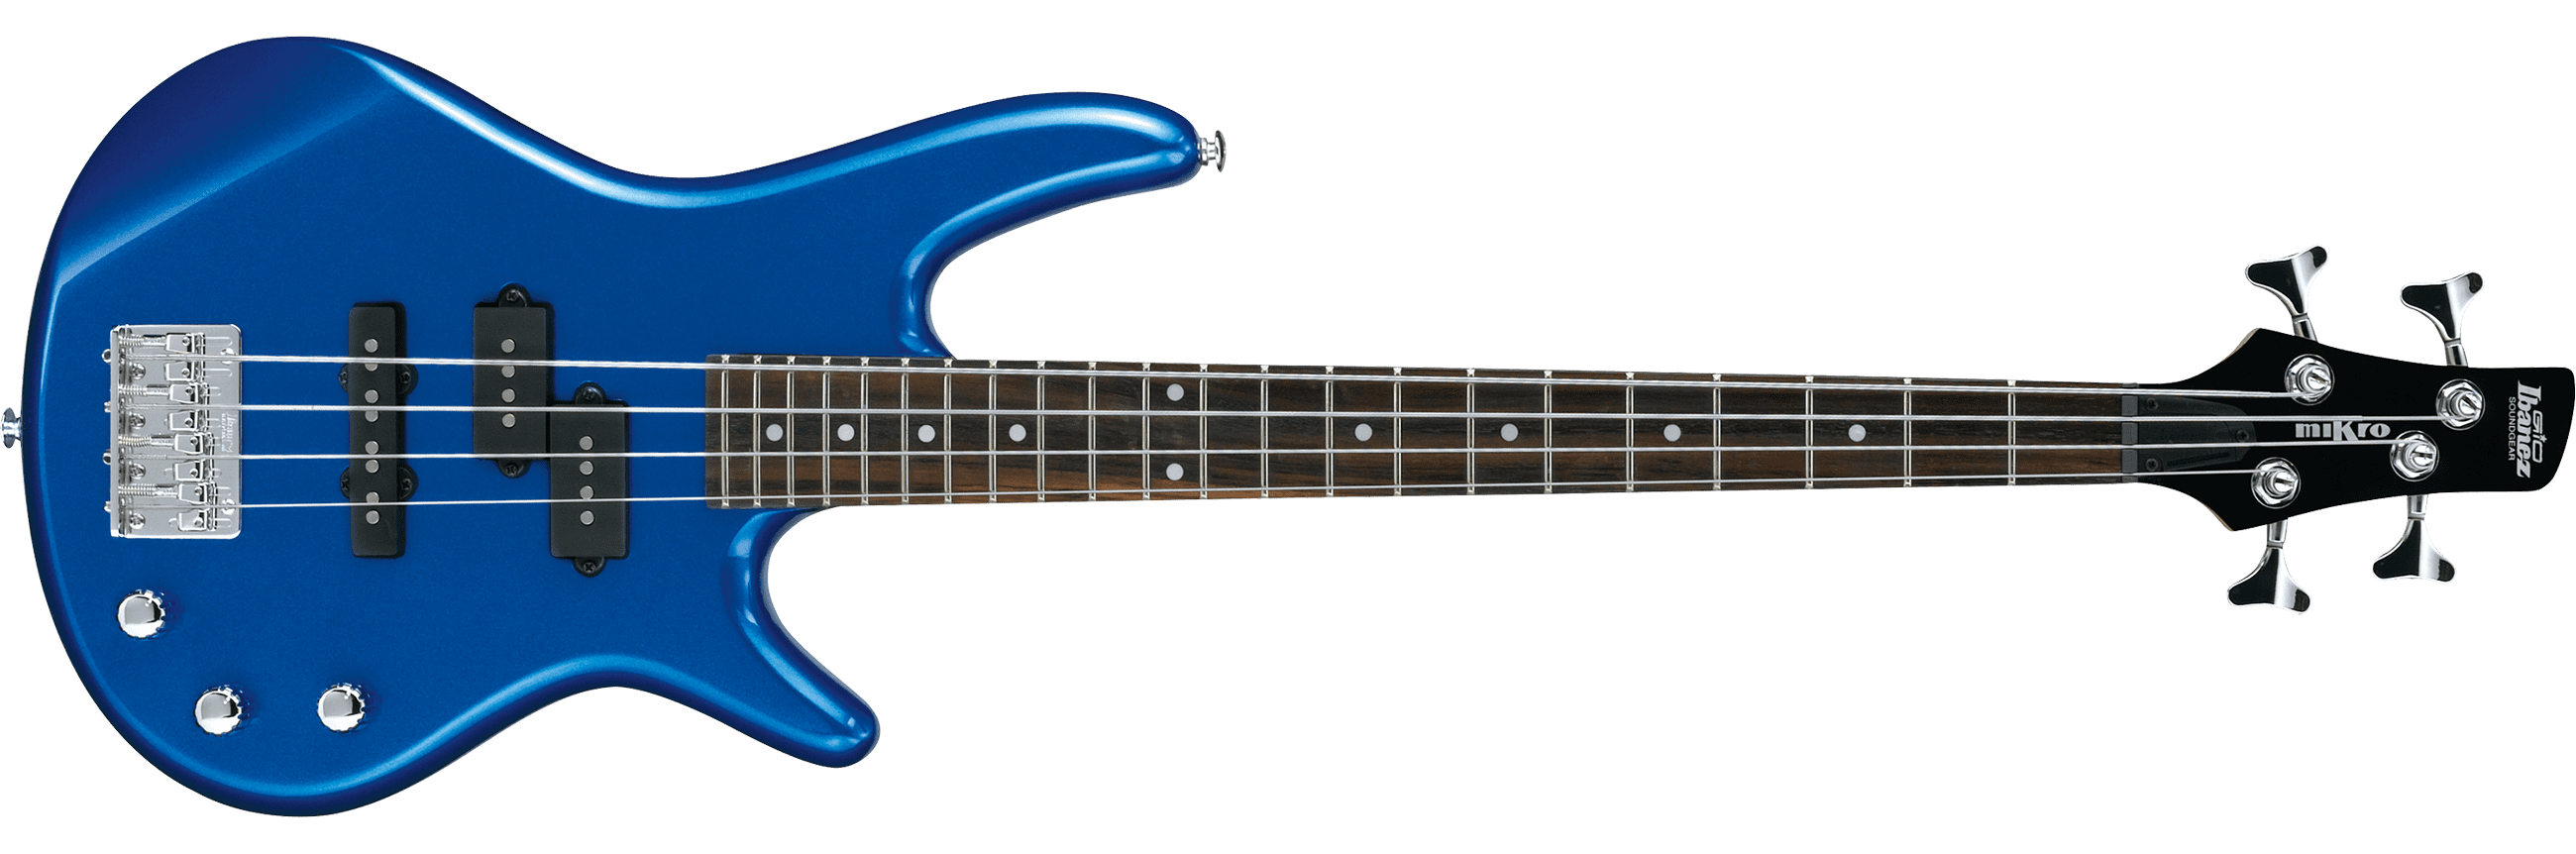 Ibanez GSRM20 Mikro Series Short Scale Electric Bass Guitar Choice of Color